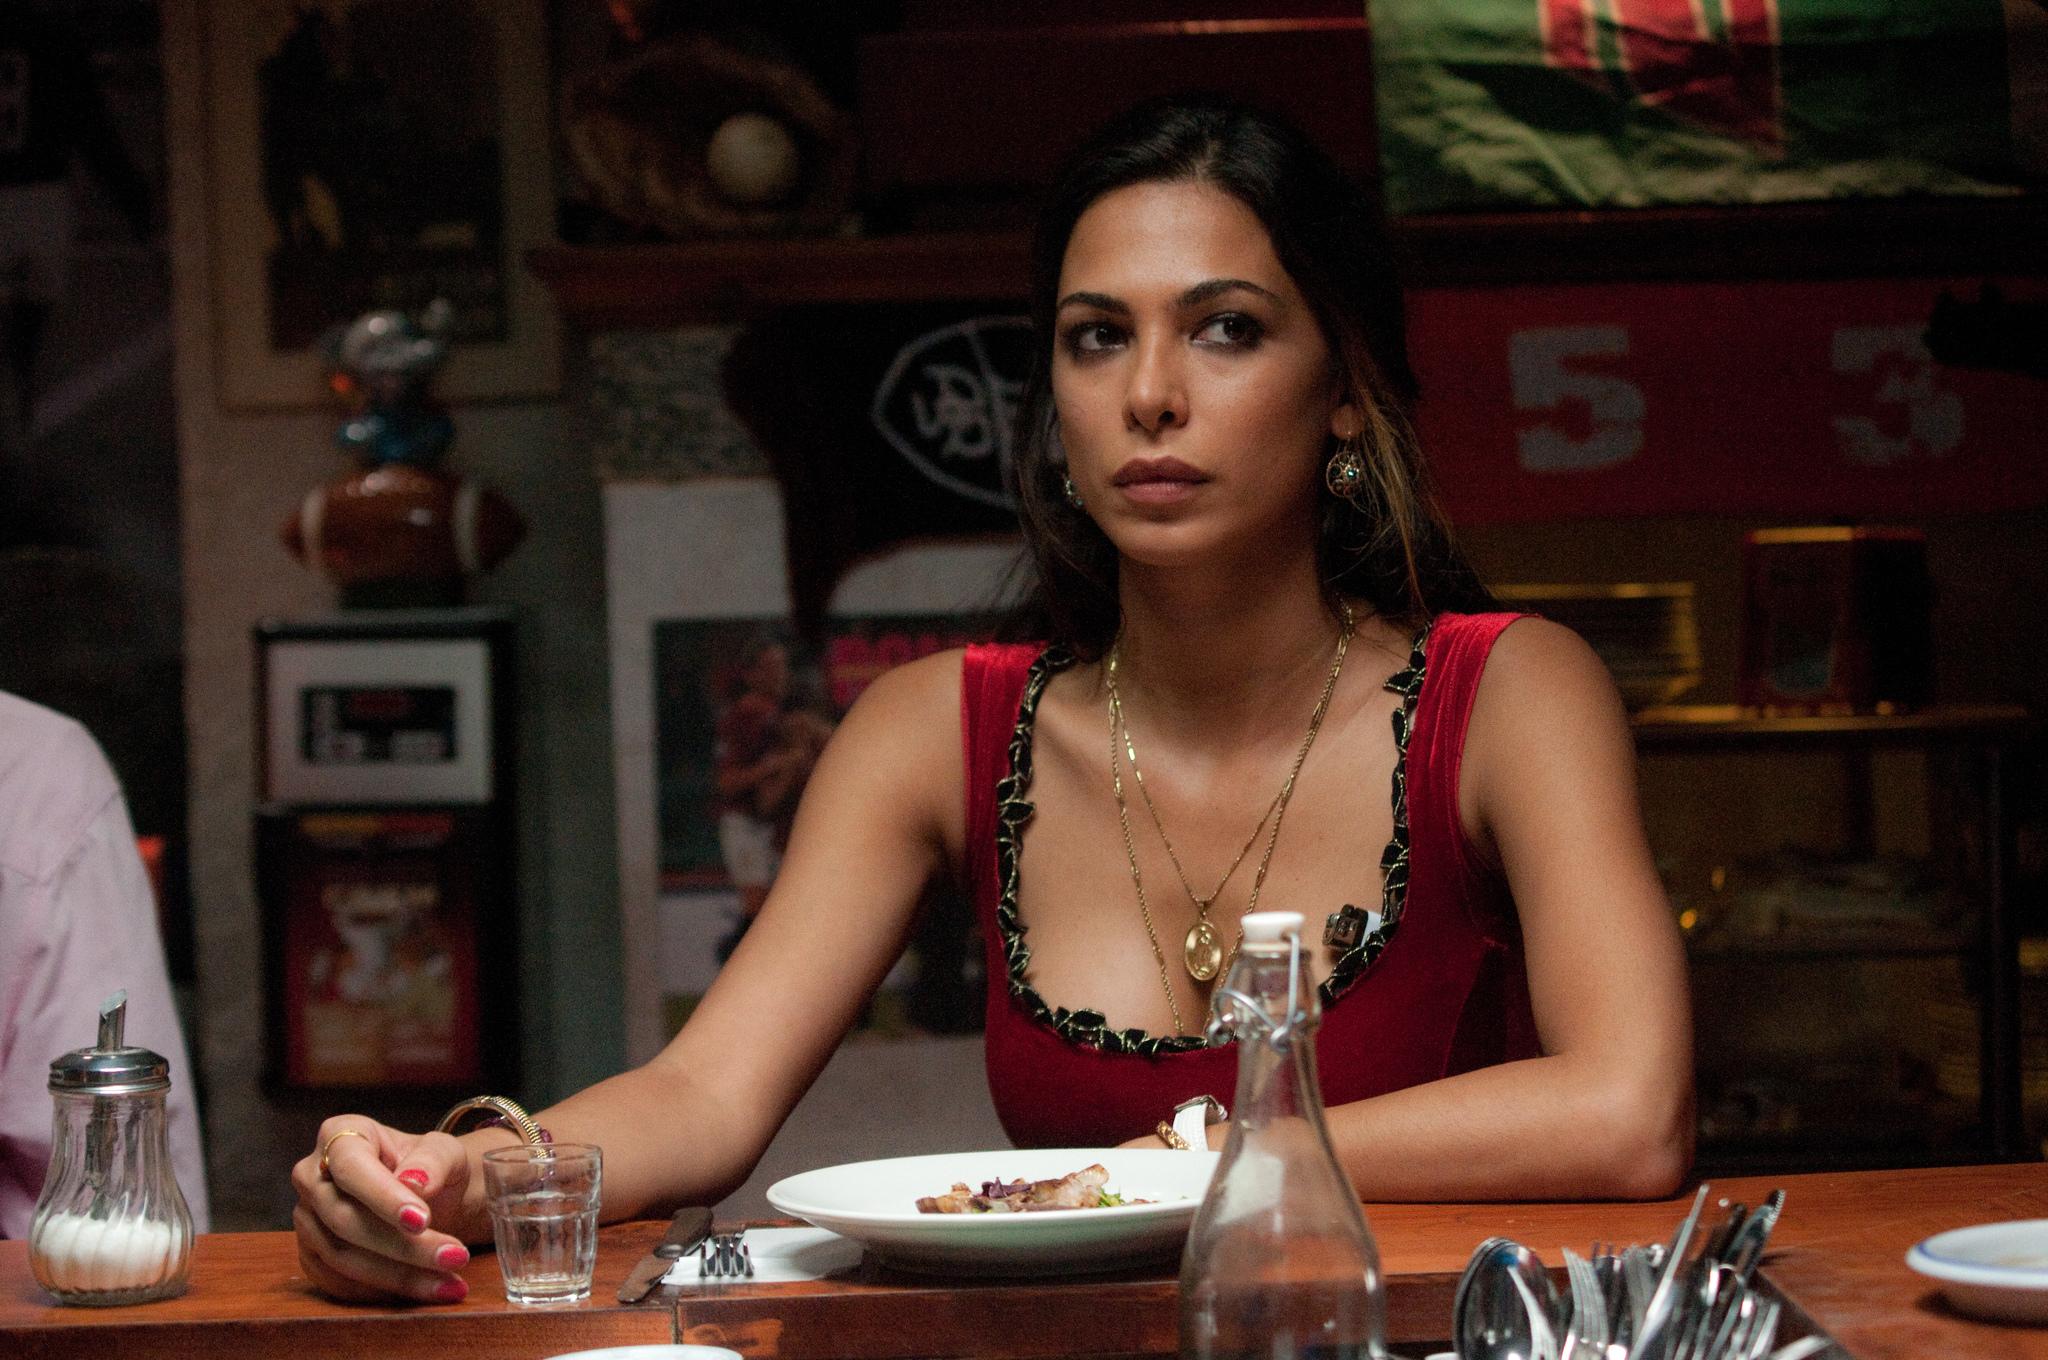 still-of-moran-atias-in-third-person-(2013)-large-picture.jpg